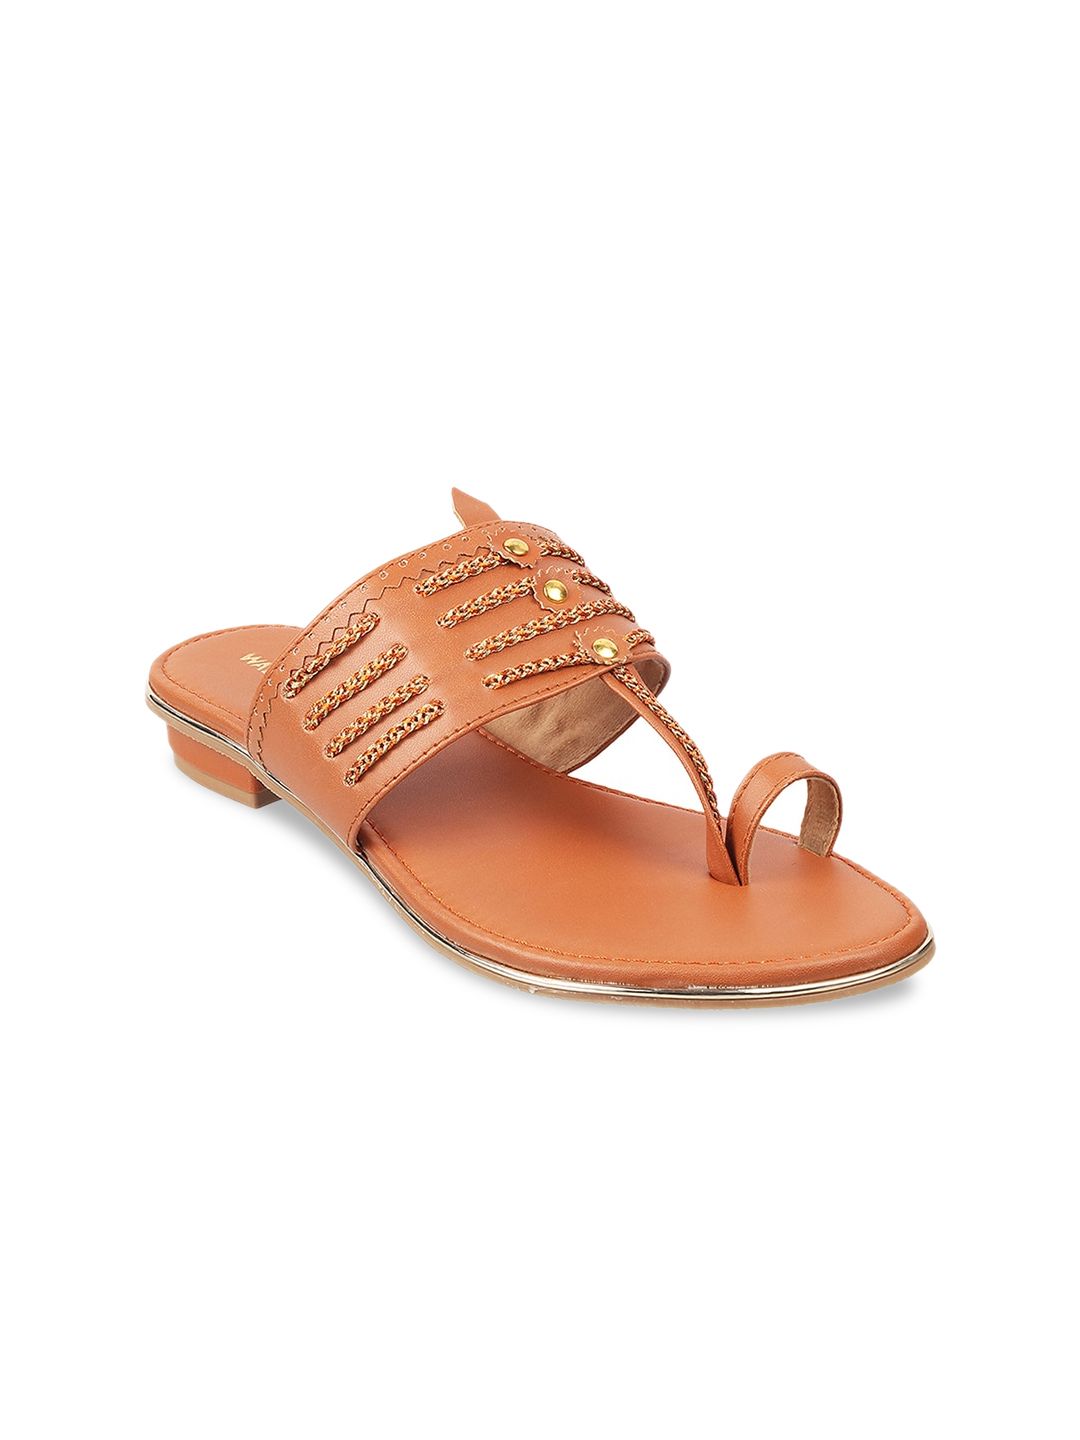 WALKWAY by Metro Women Tan One Toe Flats with Laser Cuts Price in India